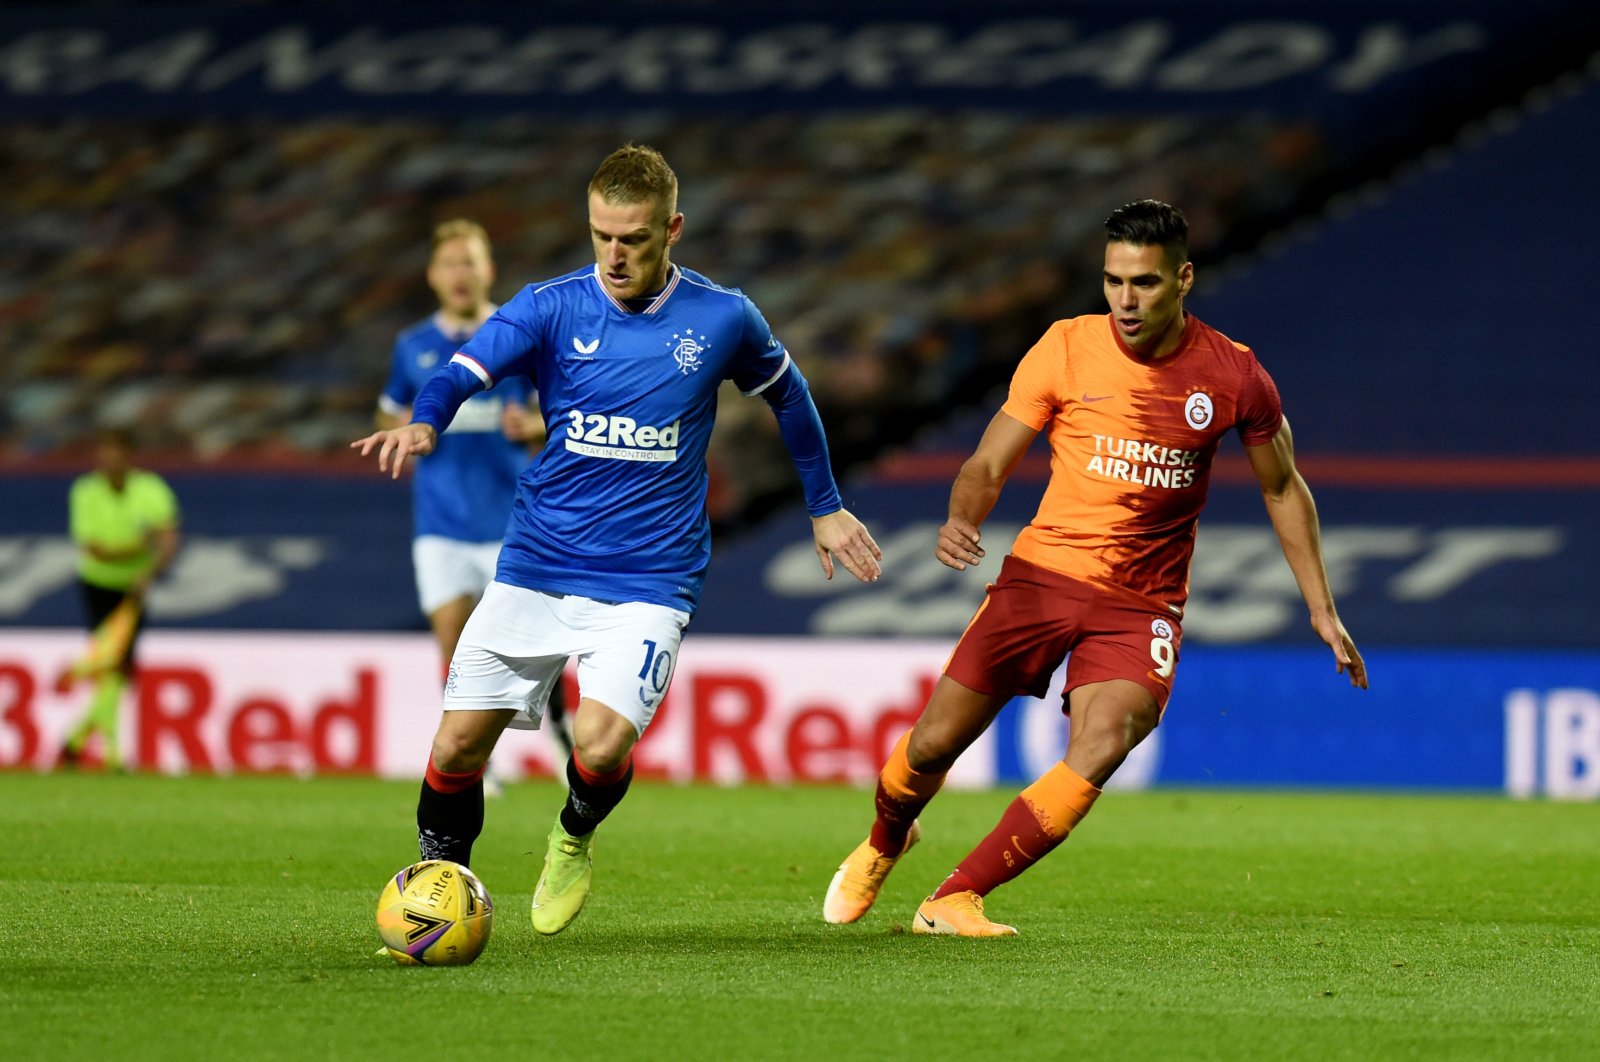 Rangers' Steven Davies (L) and Galatasaray's Radamel Falcao compete for the ball during the Europa League playoff match in Glasgow, Scotland, Oct. 1, 2020. (AA Photo)